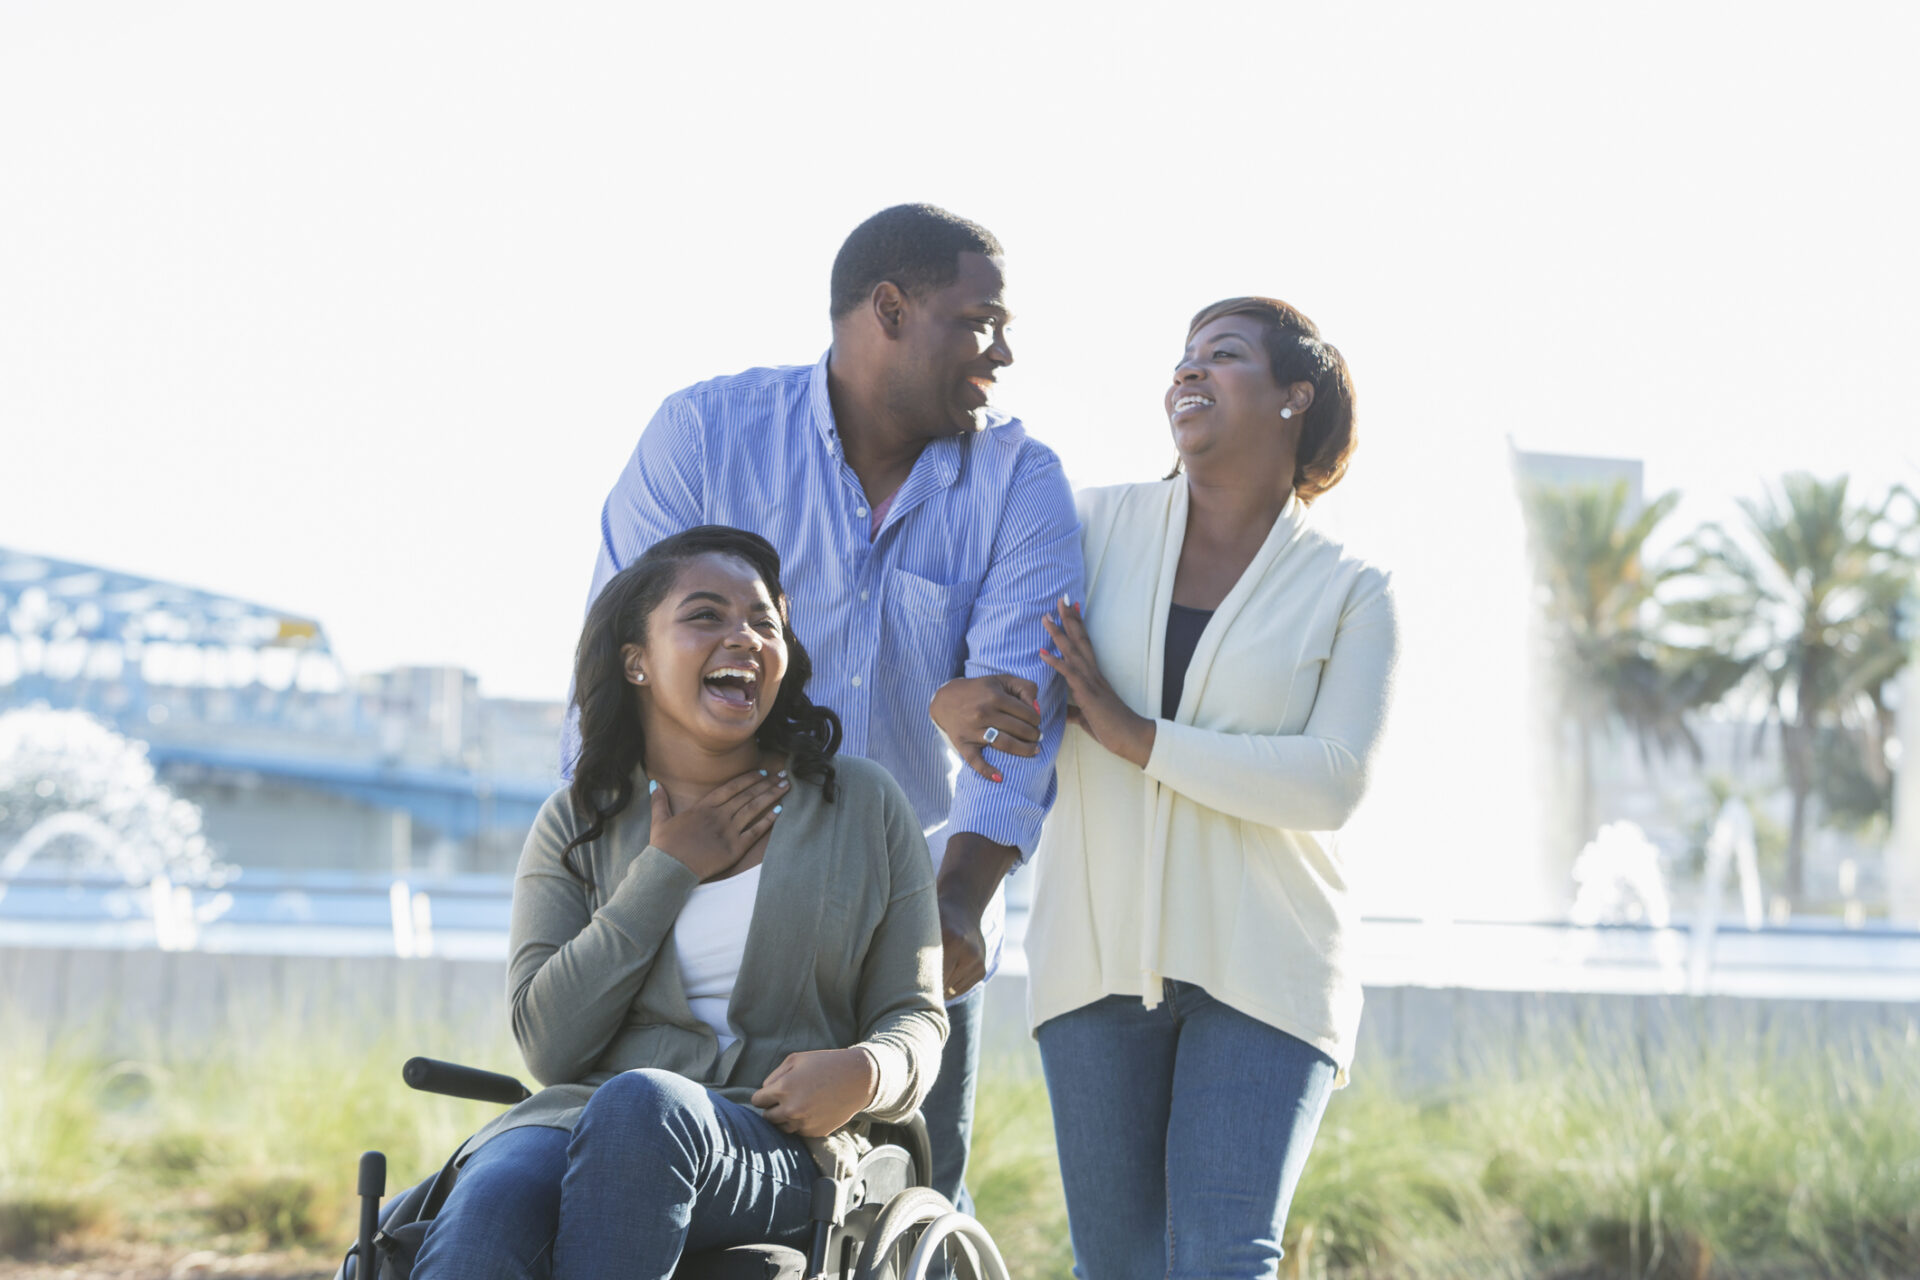 An African American family walking near a city waterfront, buildings and a bridge in the background. The teenage daughter, 15 years old, is a paraplegic, sitting in a wheelchair.